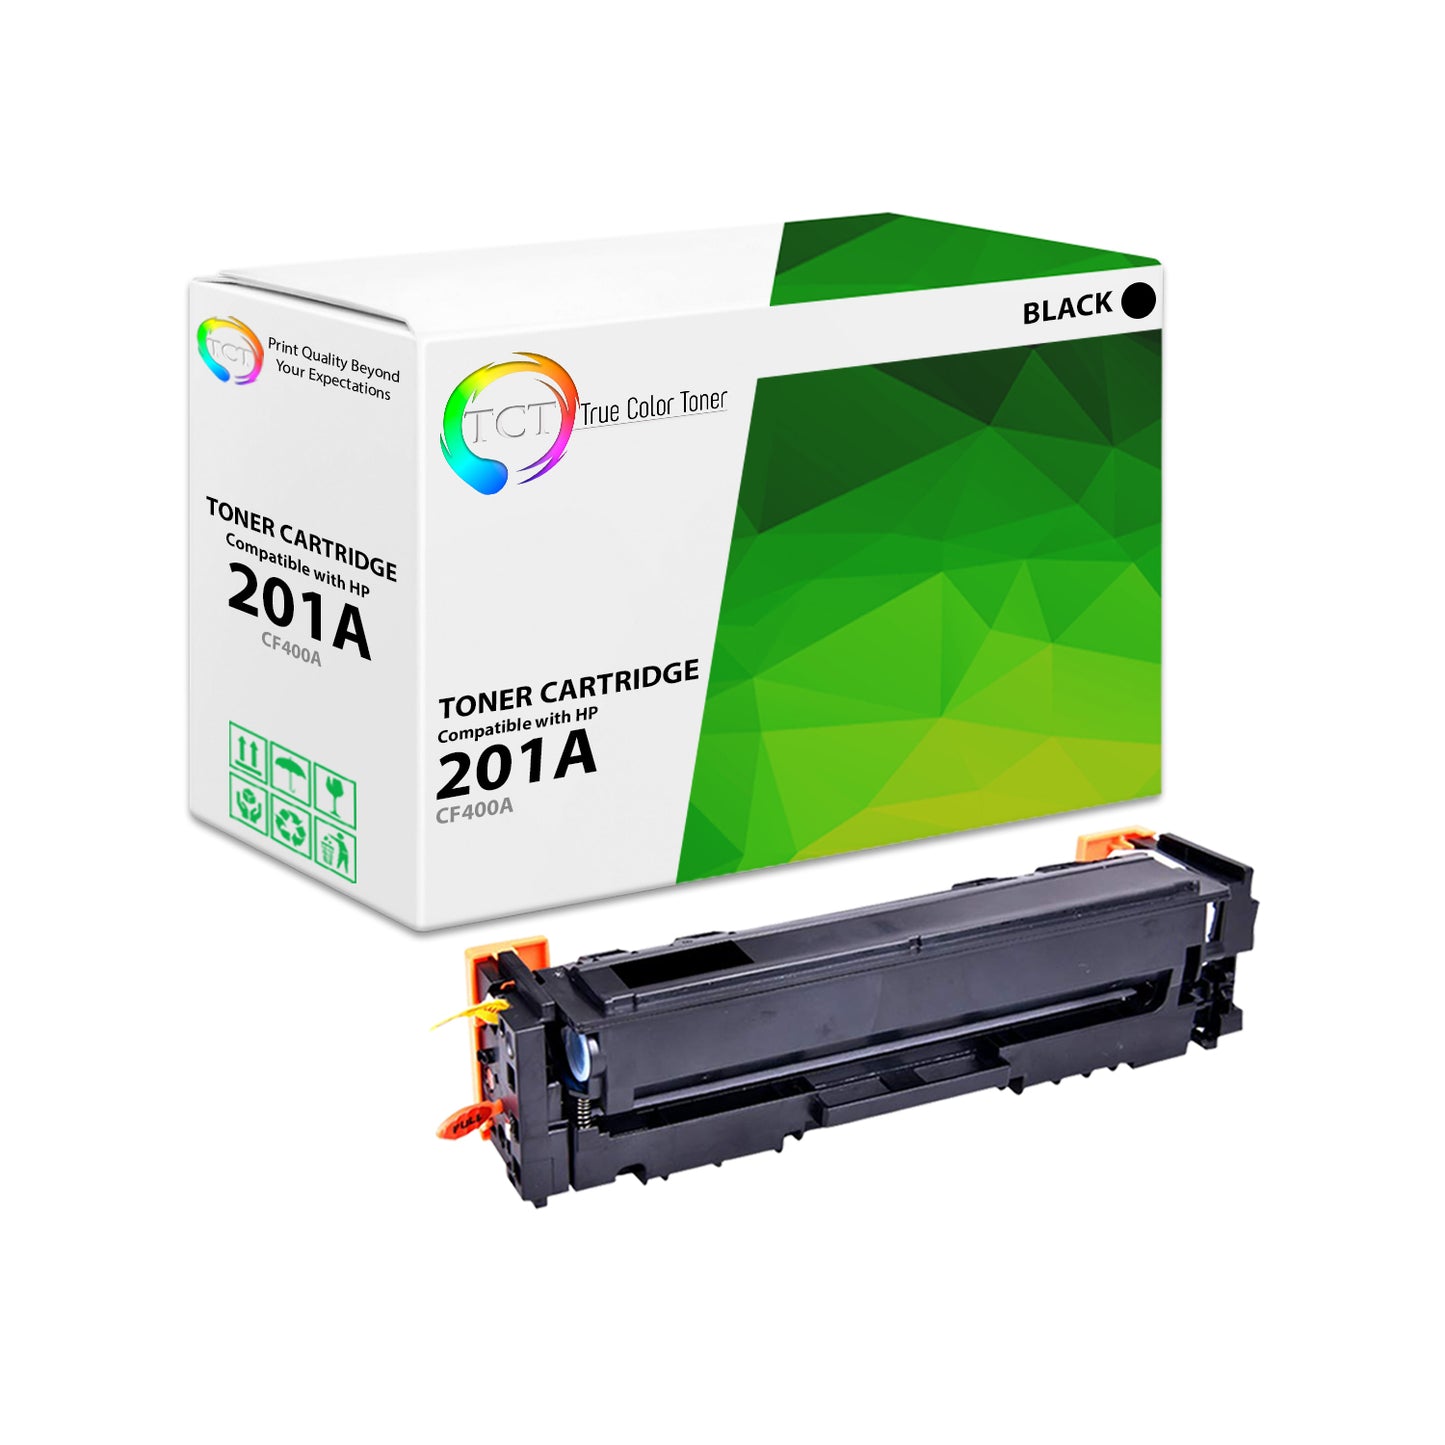 TCT Compatible Toner Cartridge Replacement for the HP 201A Series - 1 Pack Black